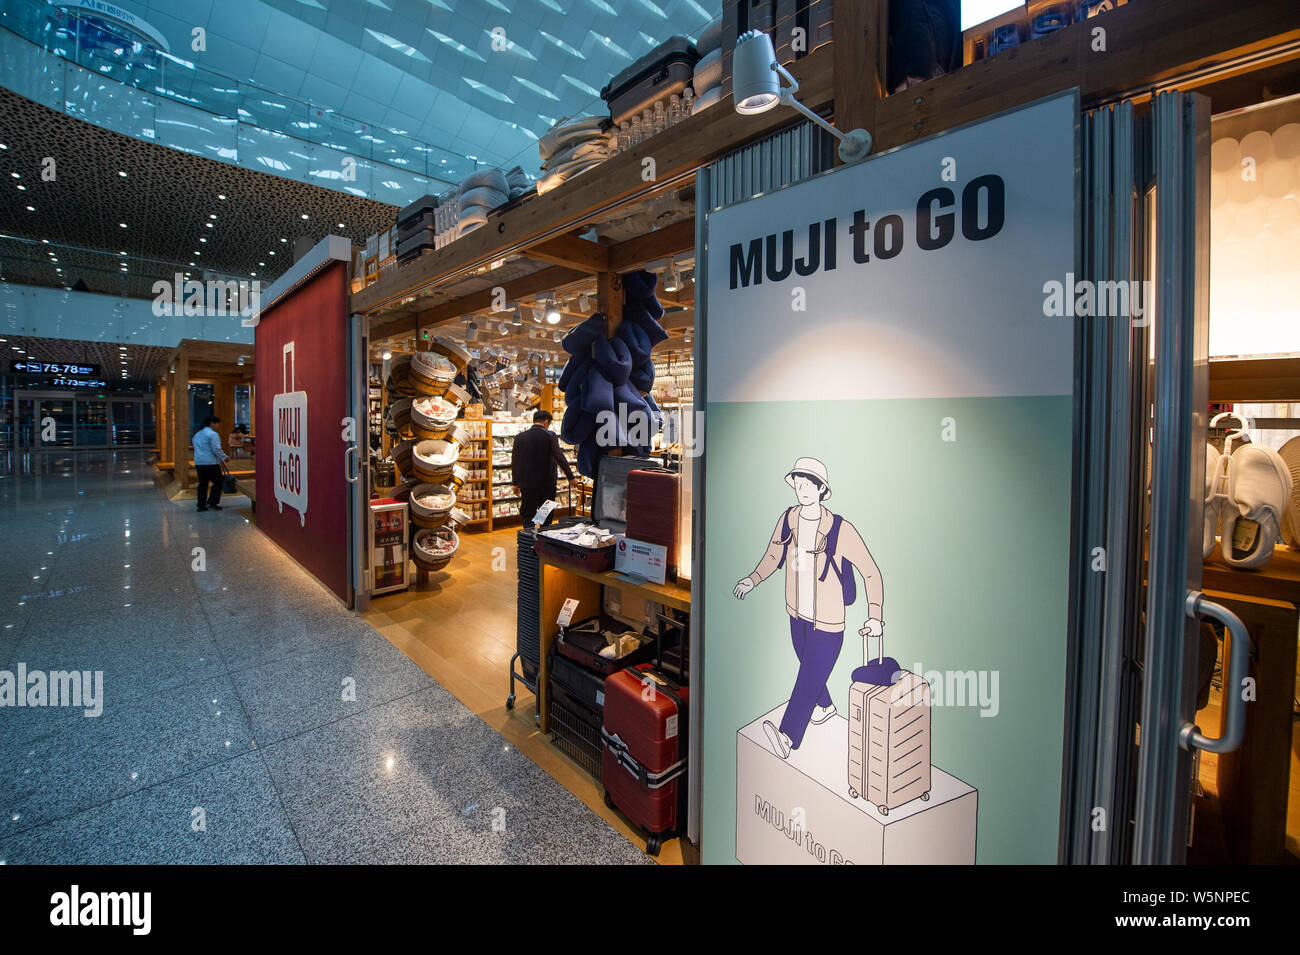 Interior view of the MUJI to GO store at the Shenzhen Bao'an International Airport in Shenzhen city, south China's Guangdong province, 9 May 2019.   D Stock Photo